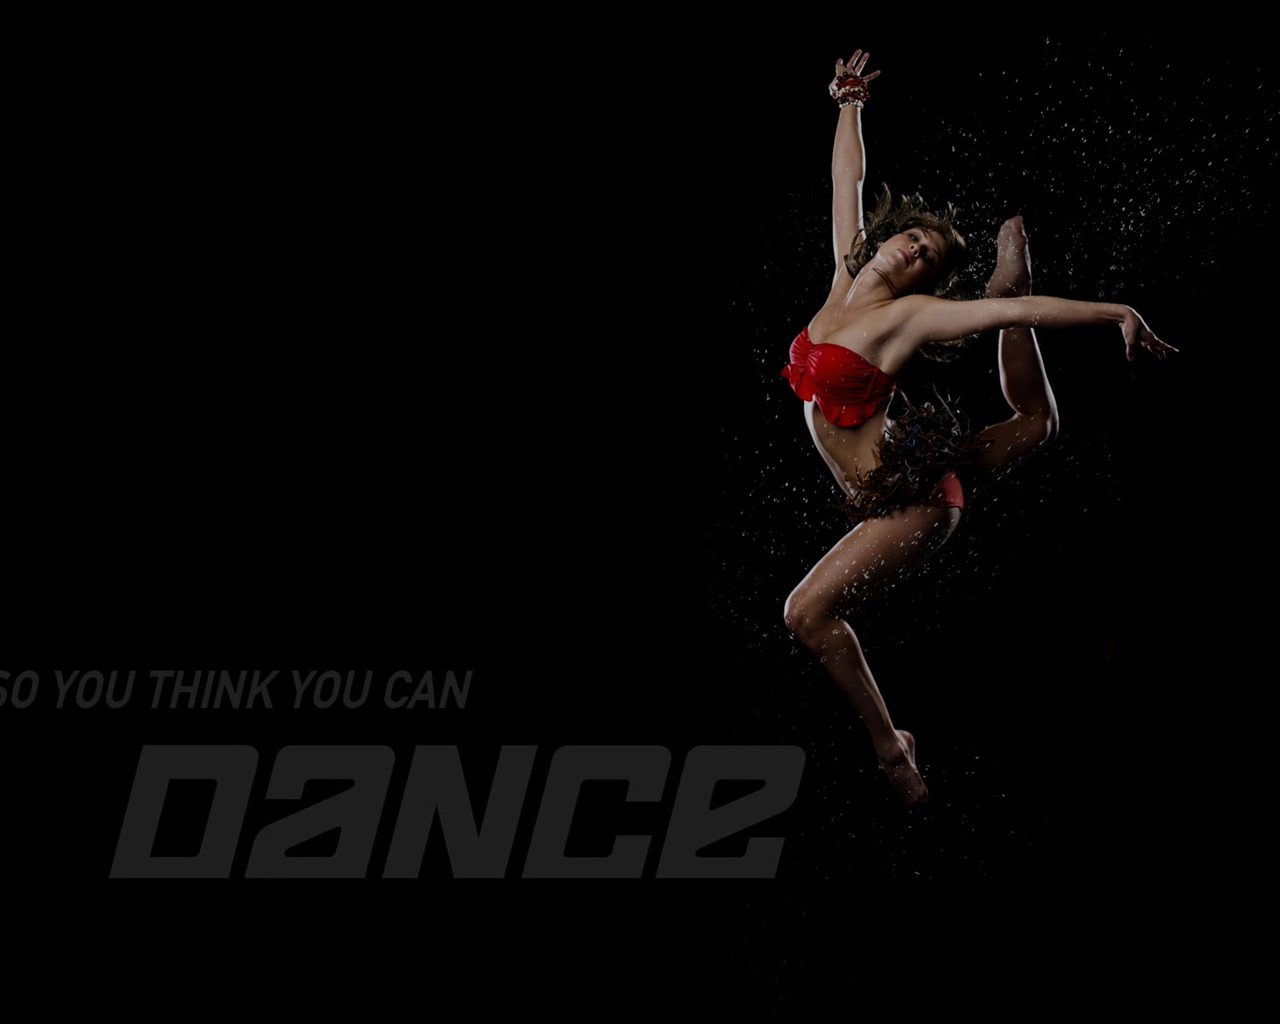 So You Think You Can Dance 舞林爭霸壁紙(二) #13 - 1280x1024